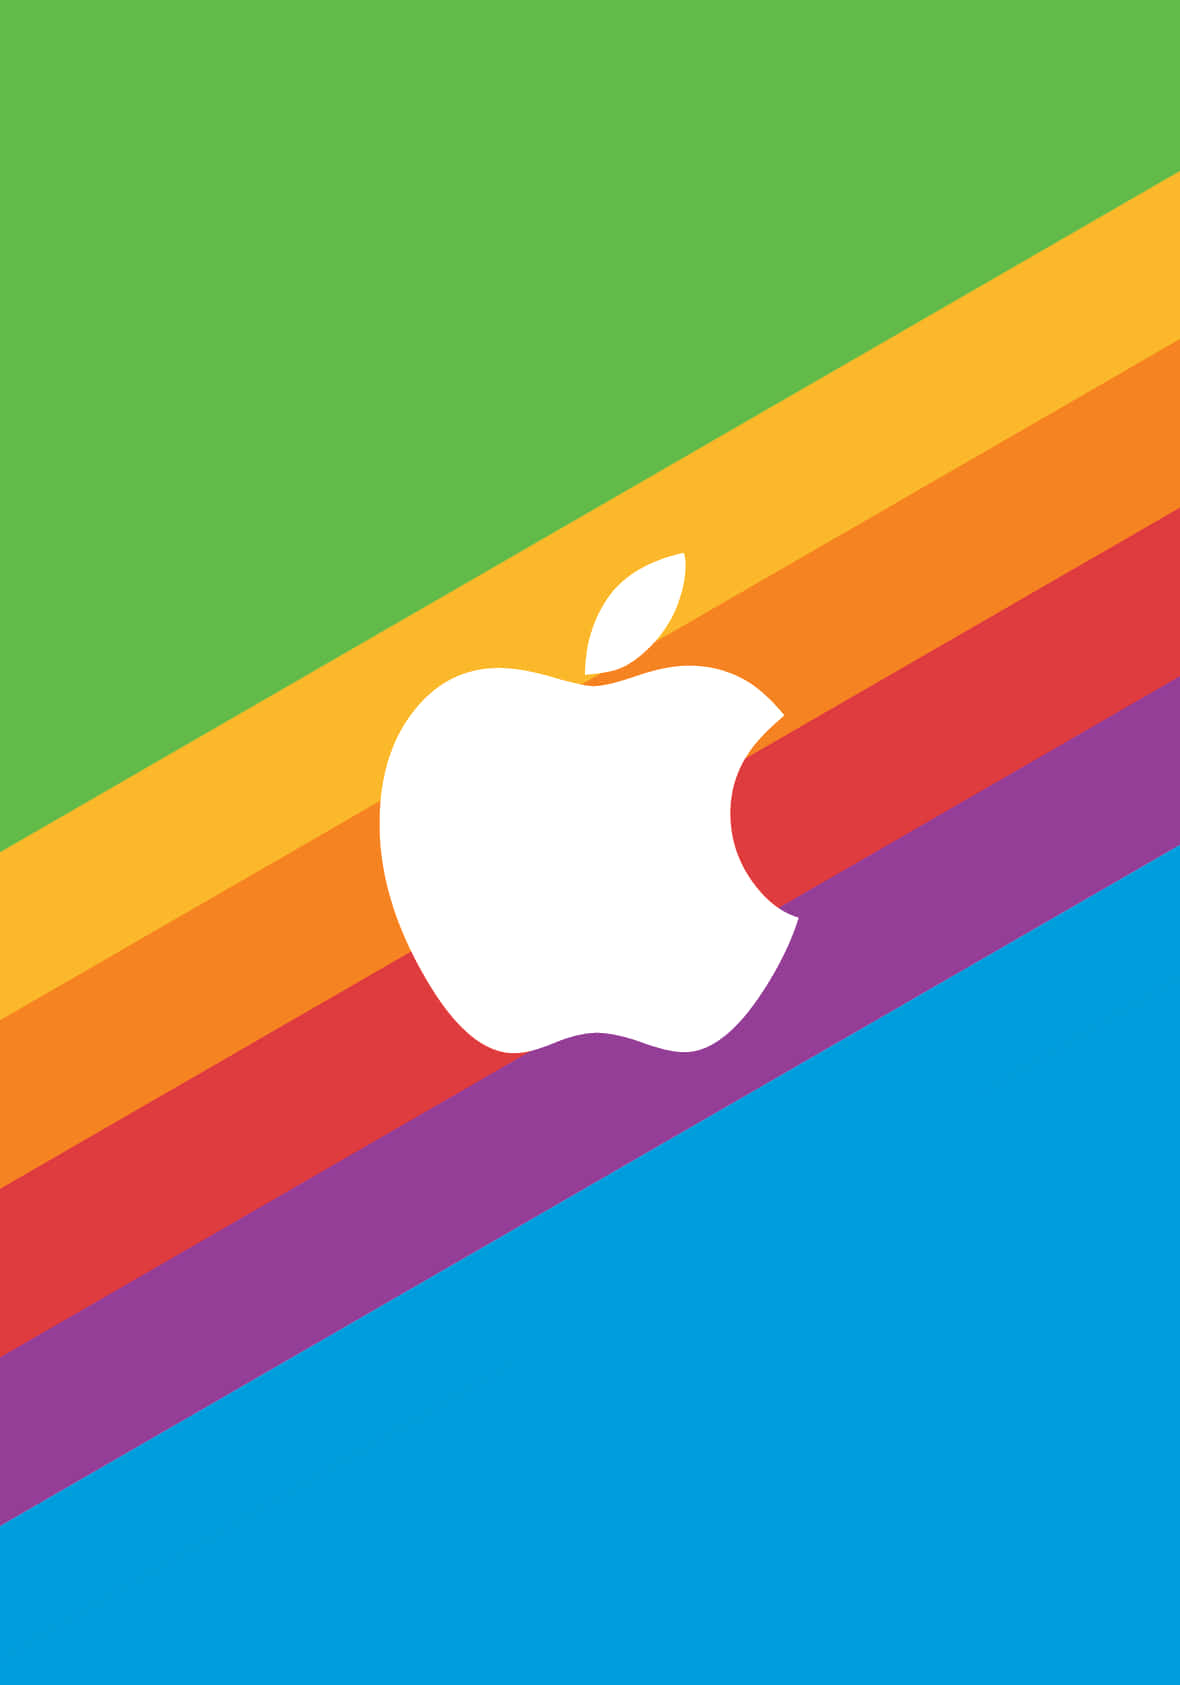 Download Apple Logo On A Colorful Background Wallpaper | Wallpapers.com